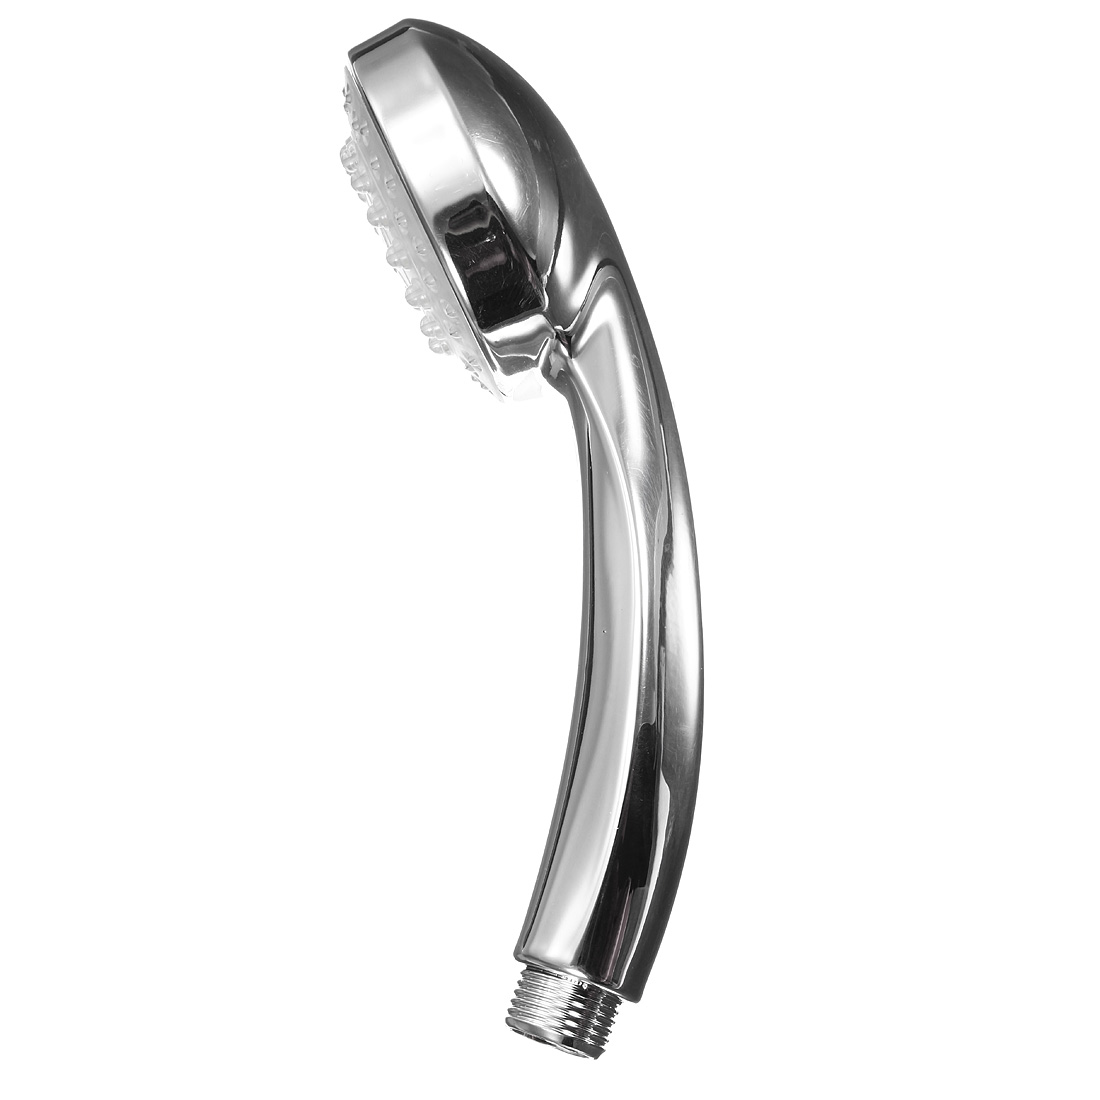 Chrome-Bathroom-Handheld-ABS-LED-Shower-Head-7-Color-Changing-Water-Glow-Light-1442625-9